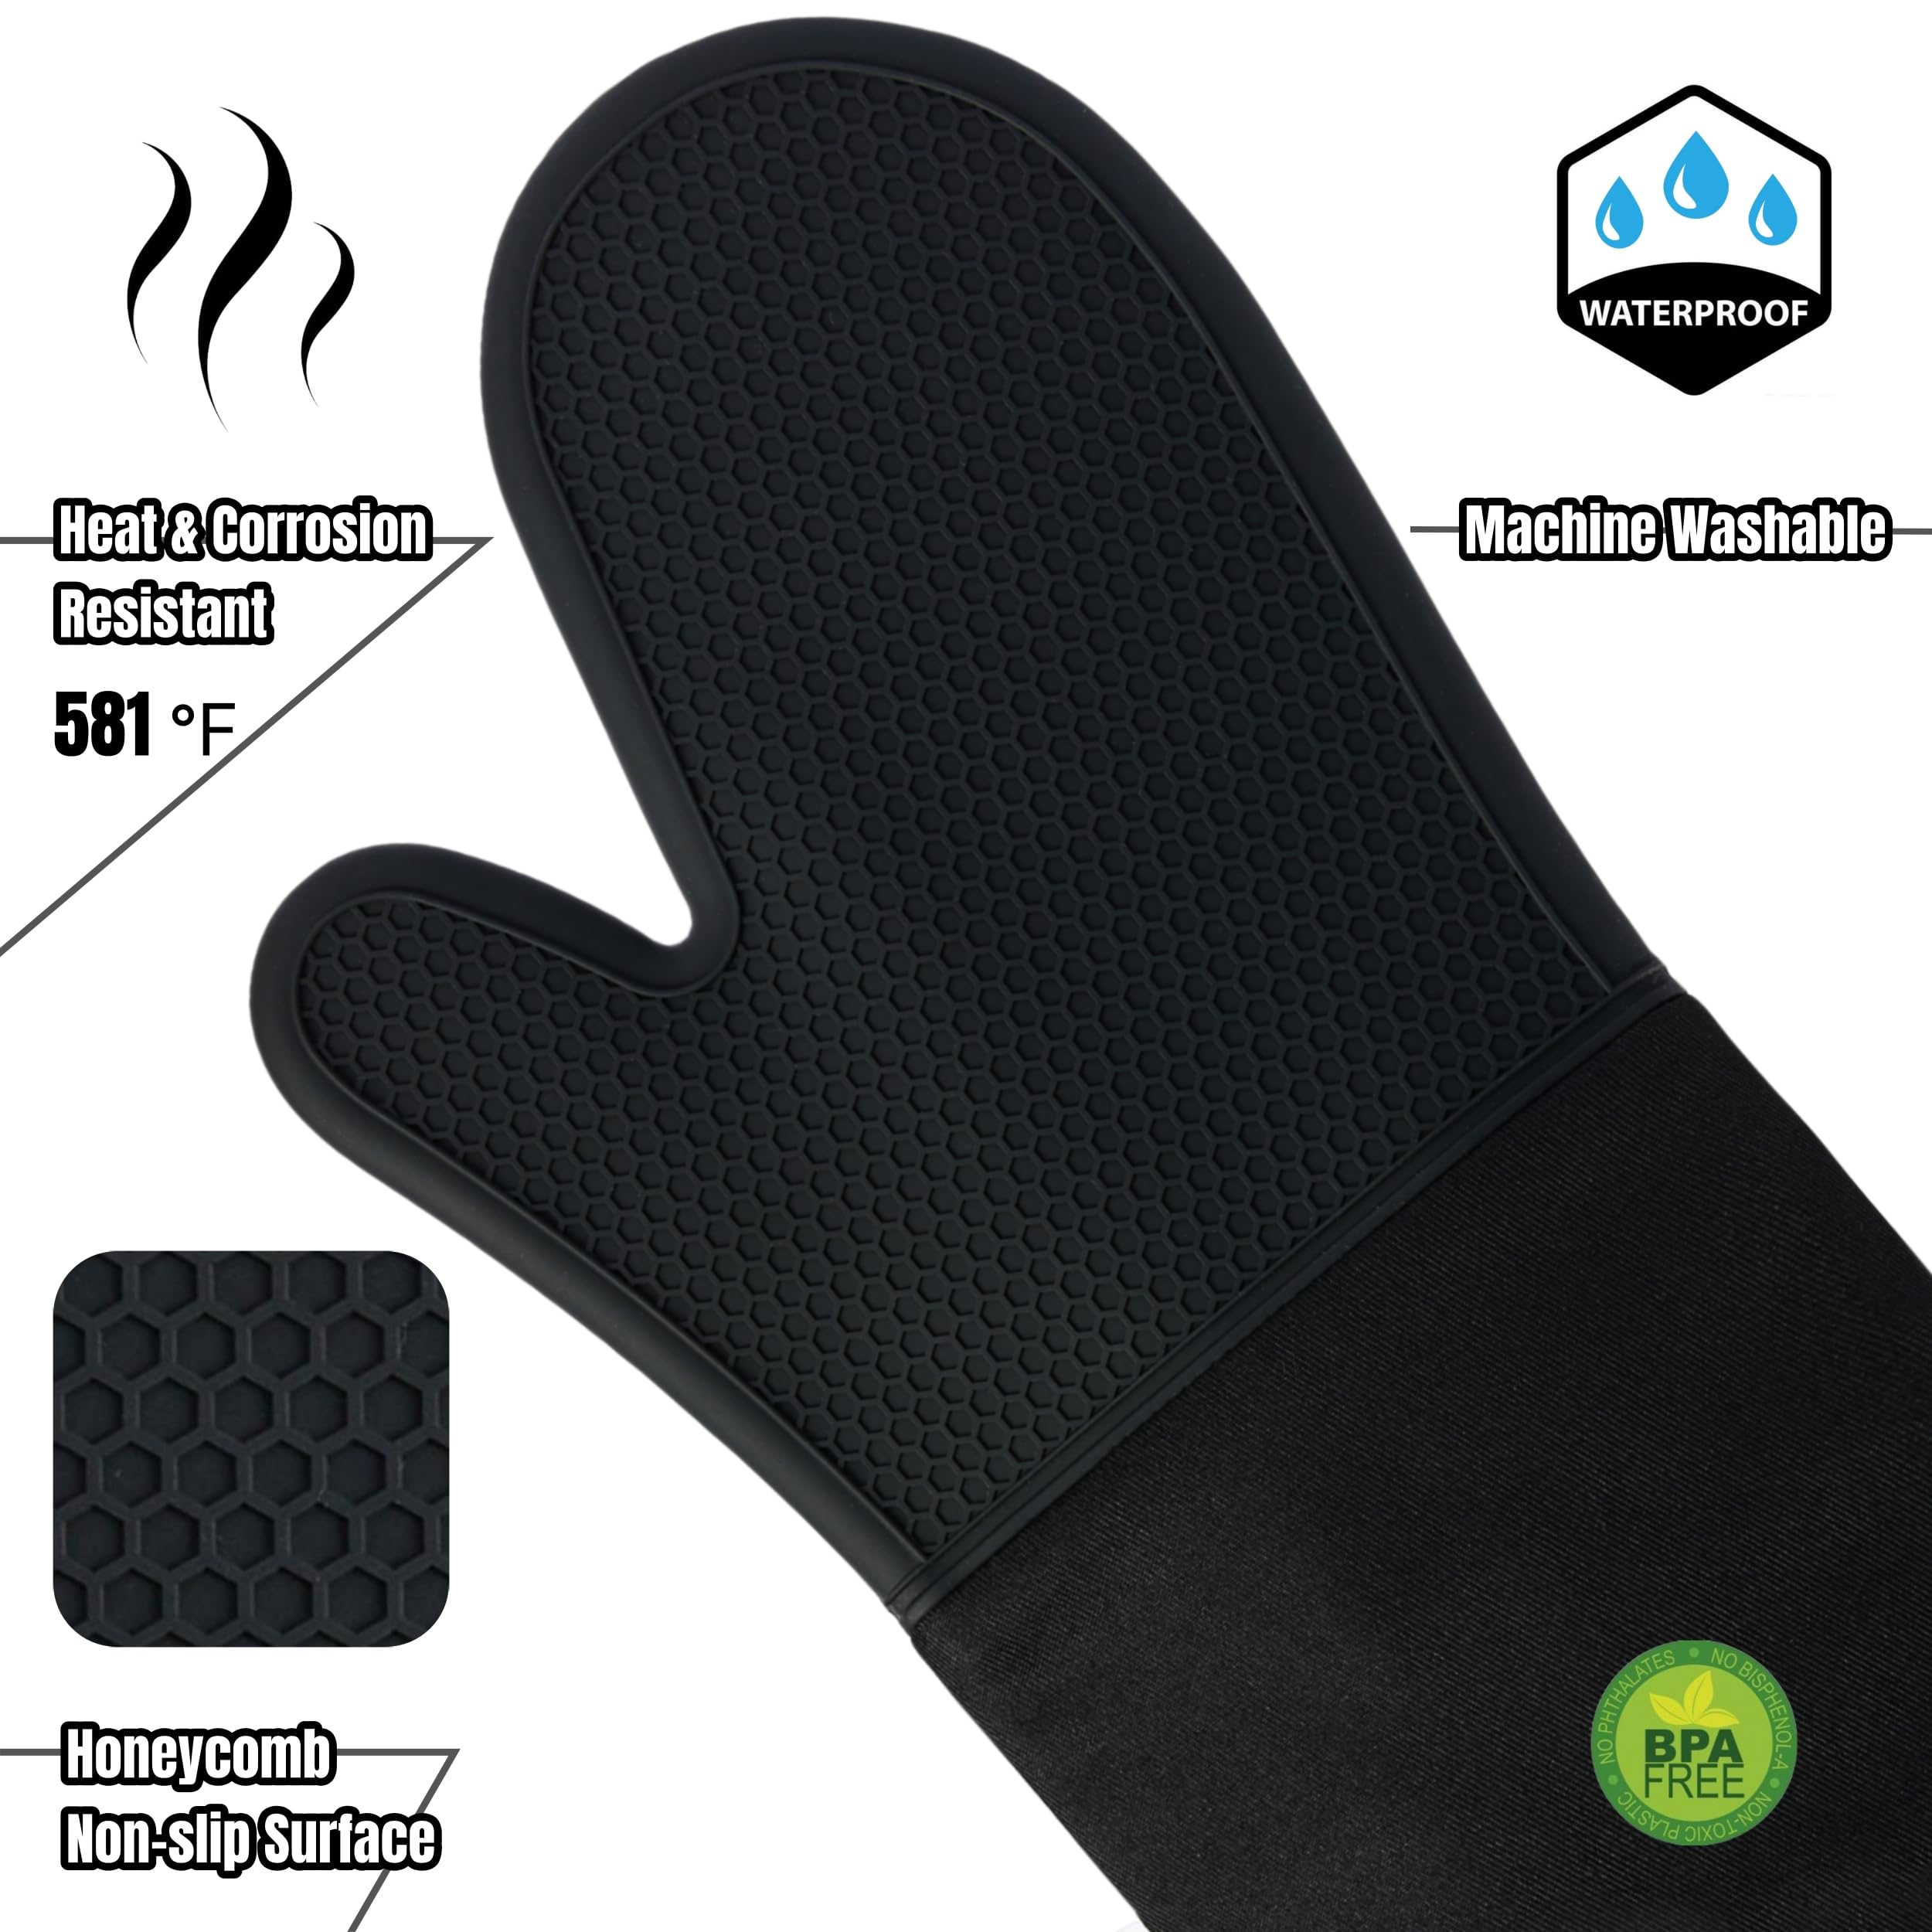 JEEKOIN Professional Oven Mitts Flexible and Durable, Honeycomb Silicone Oven Mitt Heat Resistant 581, Extra Long Cooking Protection BBQ Gloves, Non-Slip Pot Holders, BPA-Free, 14 Inch 1 Pair, Black